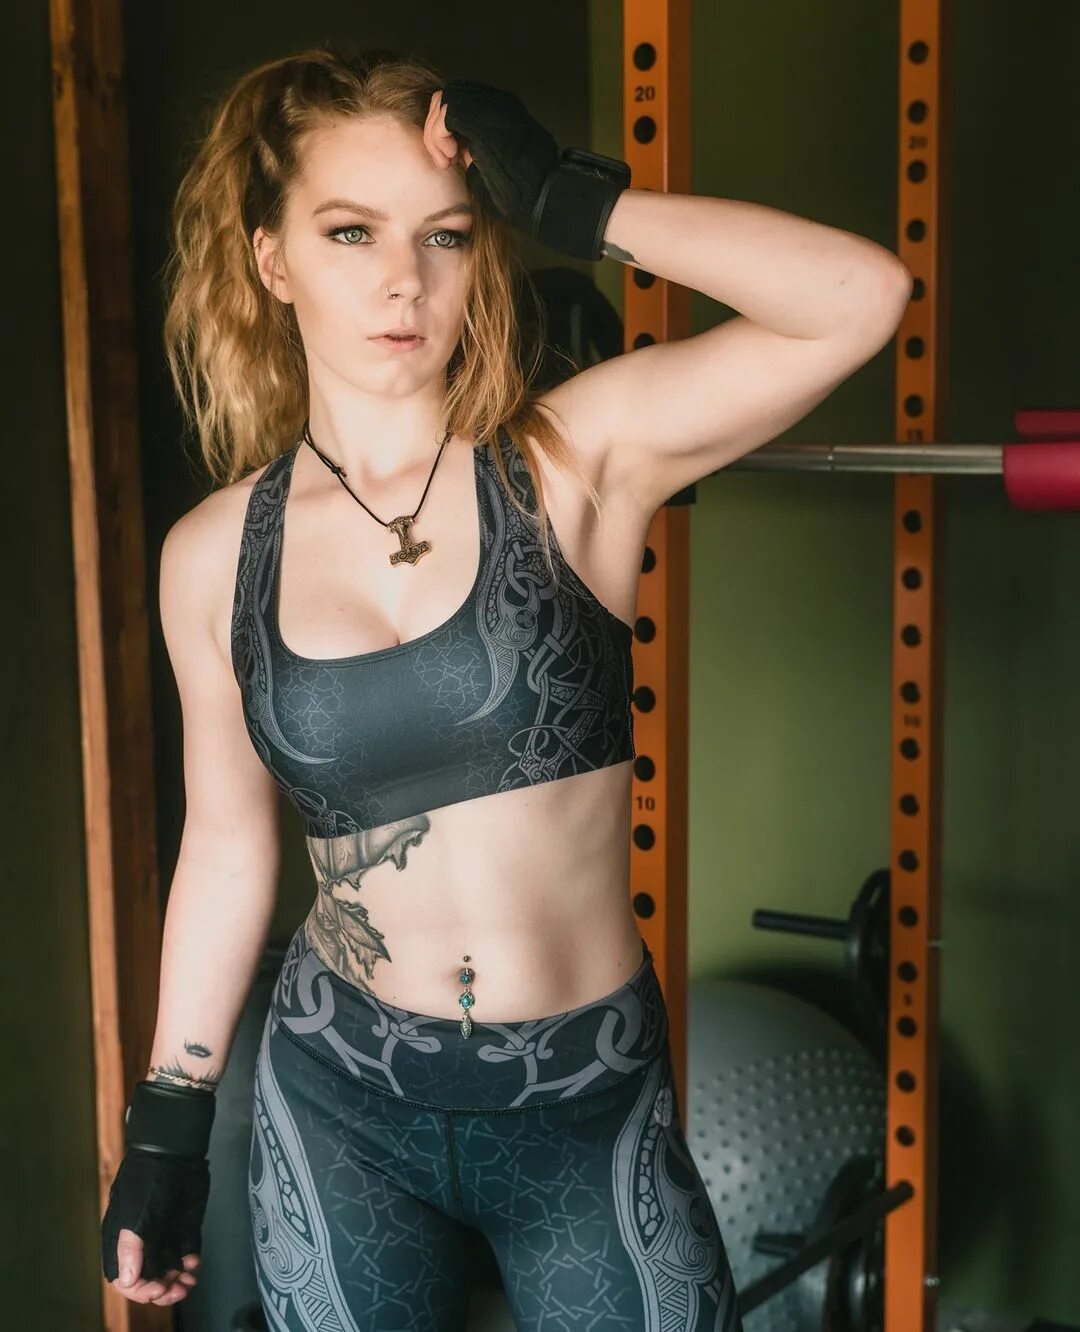 The Lady LeananSidhe в Instagram: "Are folks back in normal gyms post ...